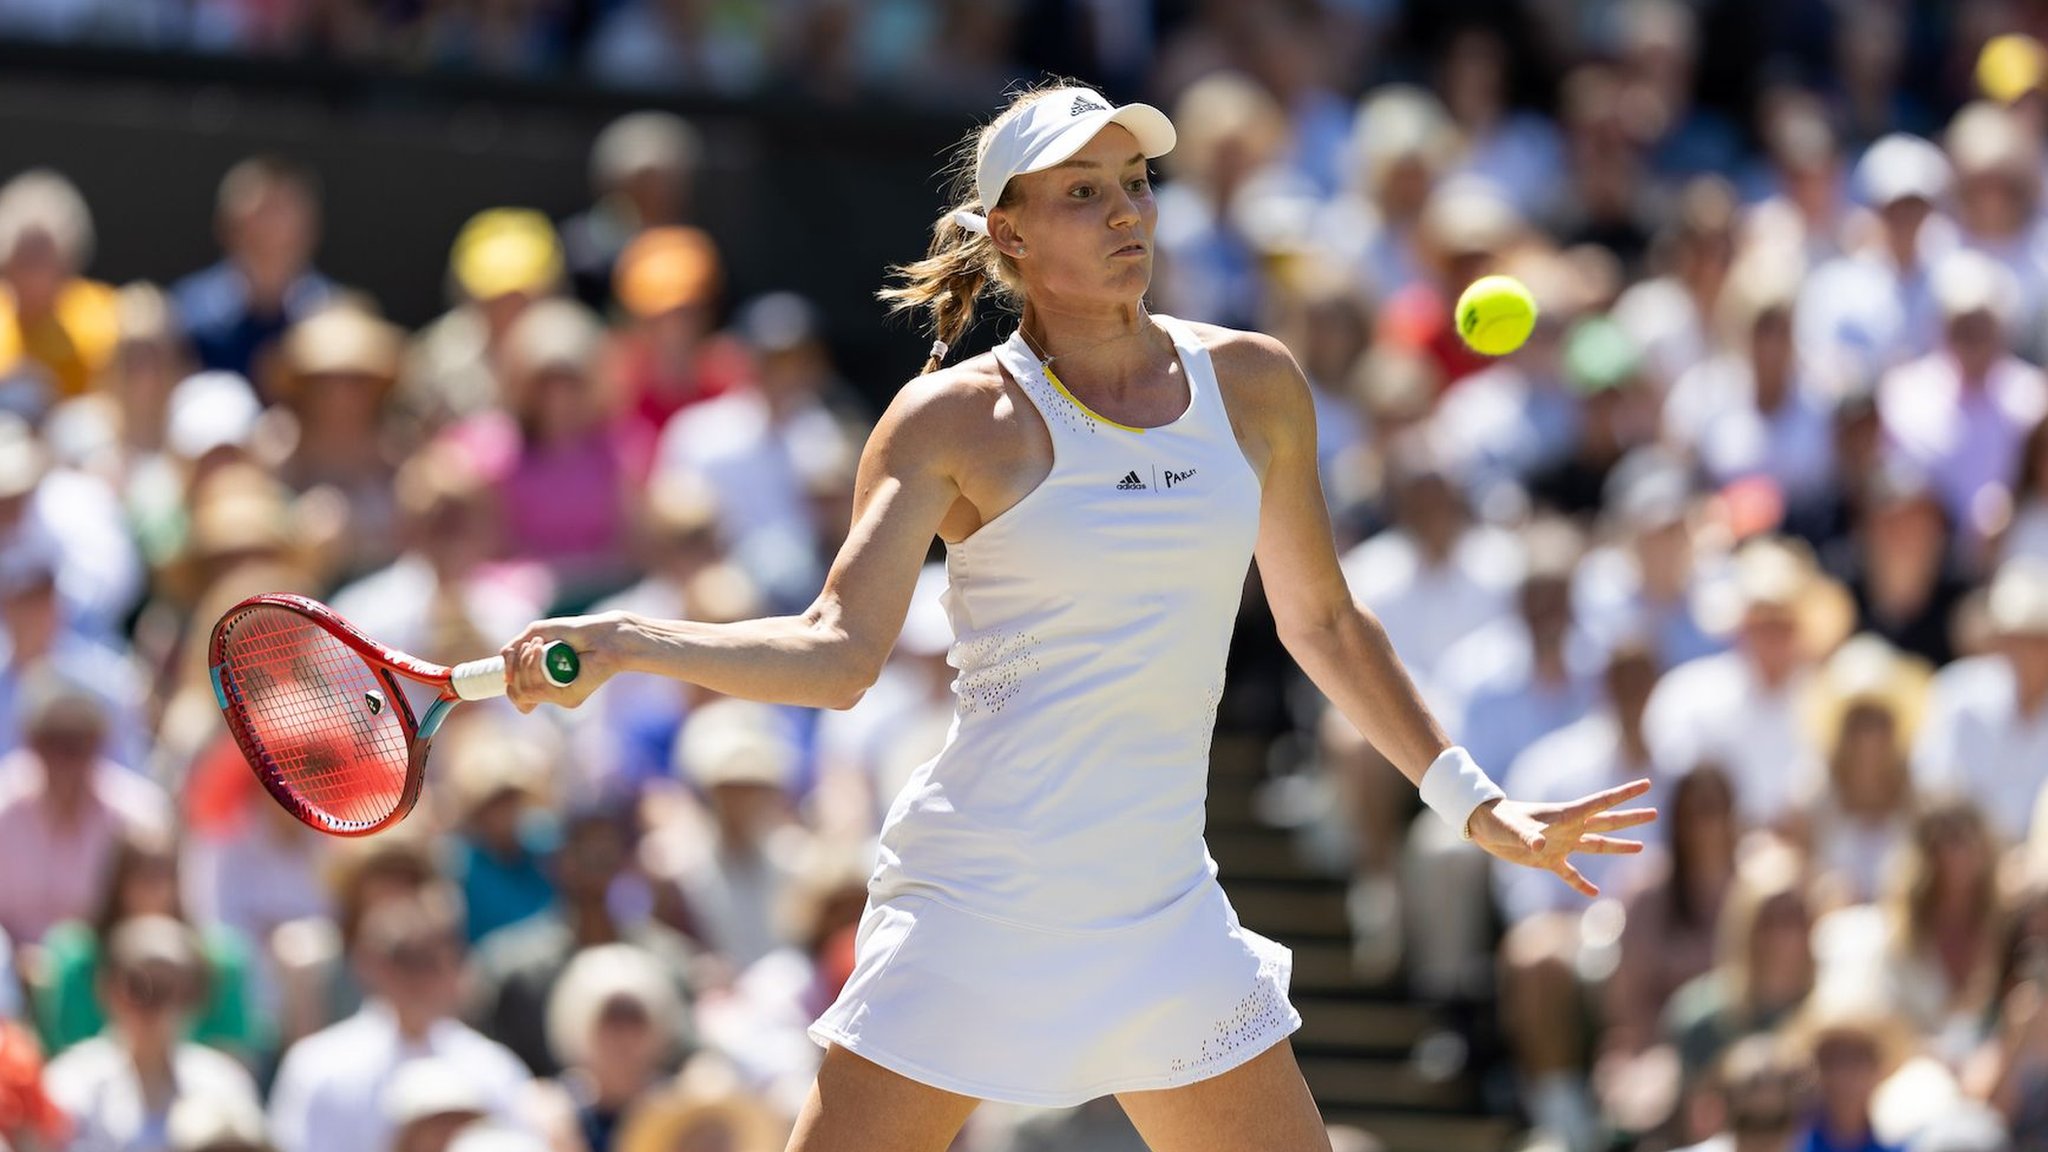 Wimbledon finally changes all-white rule for women - Yahoo Sports